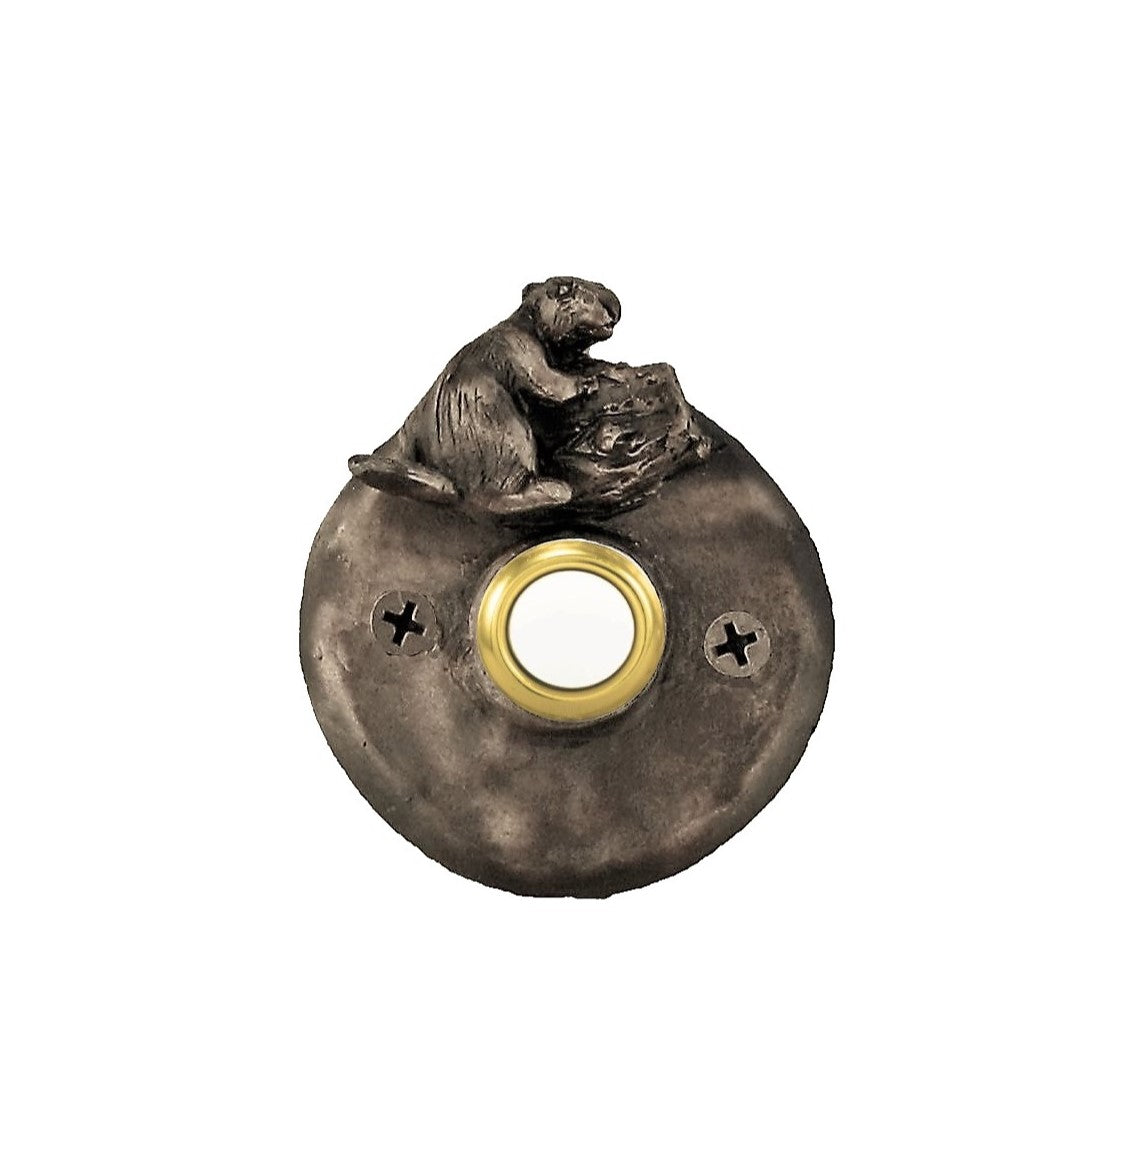 Round bronze doorbell with beaver gnawing a tree branch